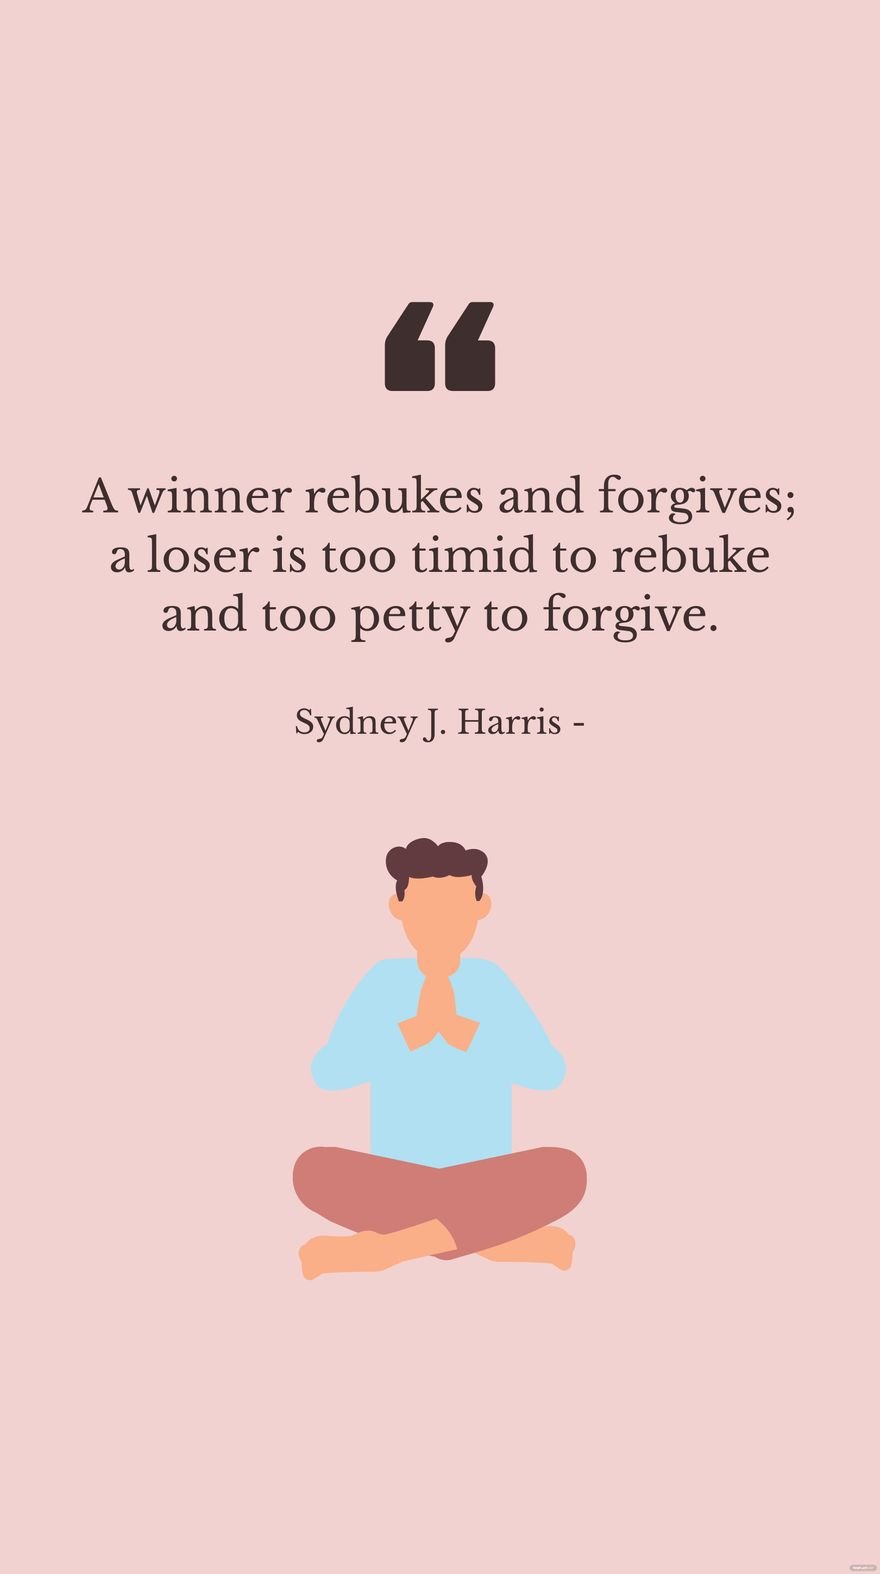 Free Sydney J. Harris - A winner rebukes and forgives; a loser is too timid to rebuke and too petty to forgive.